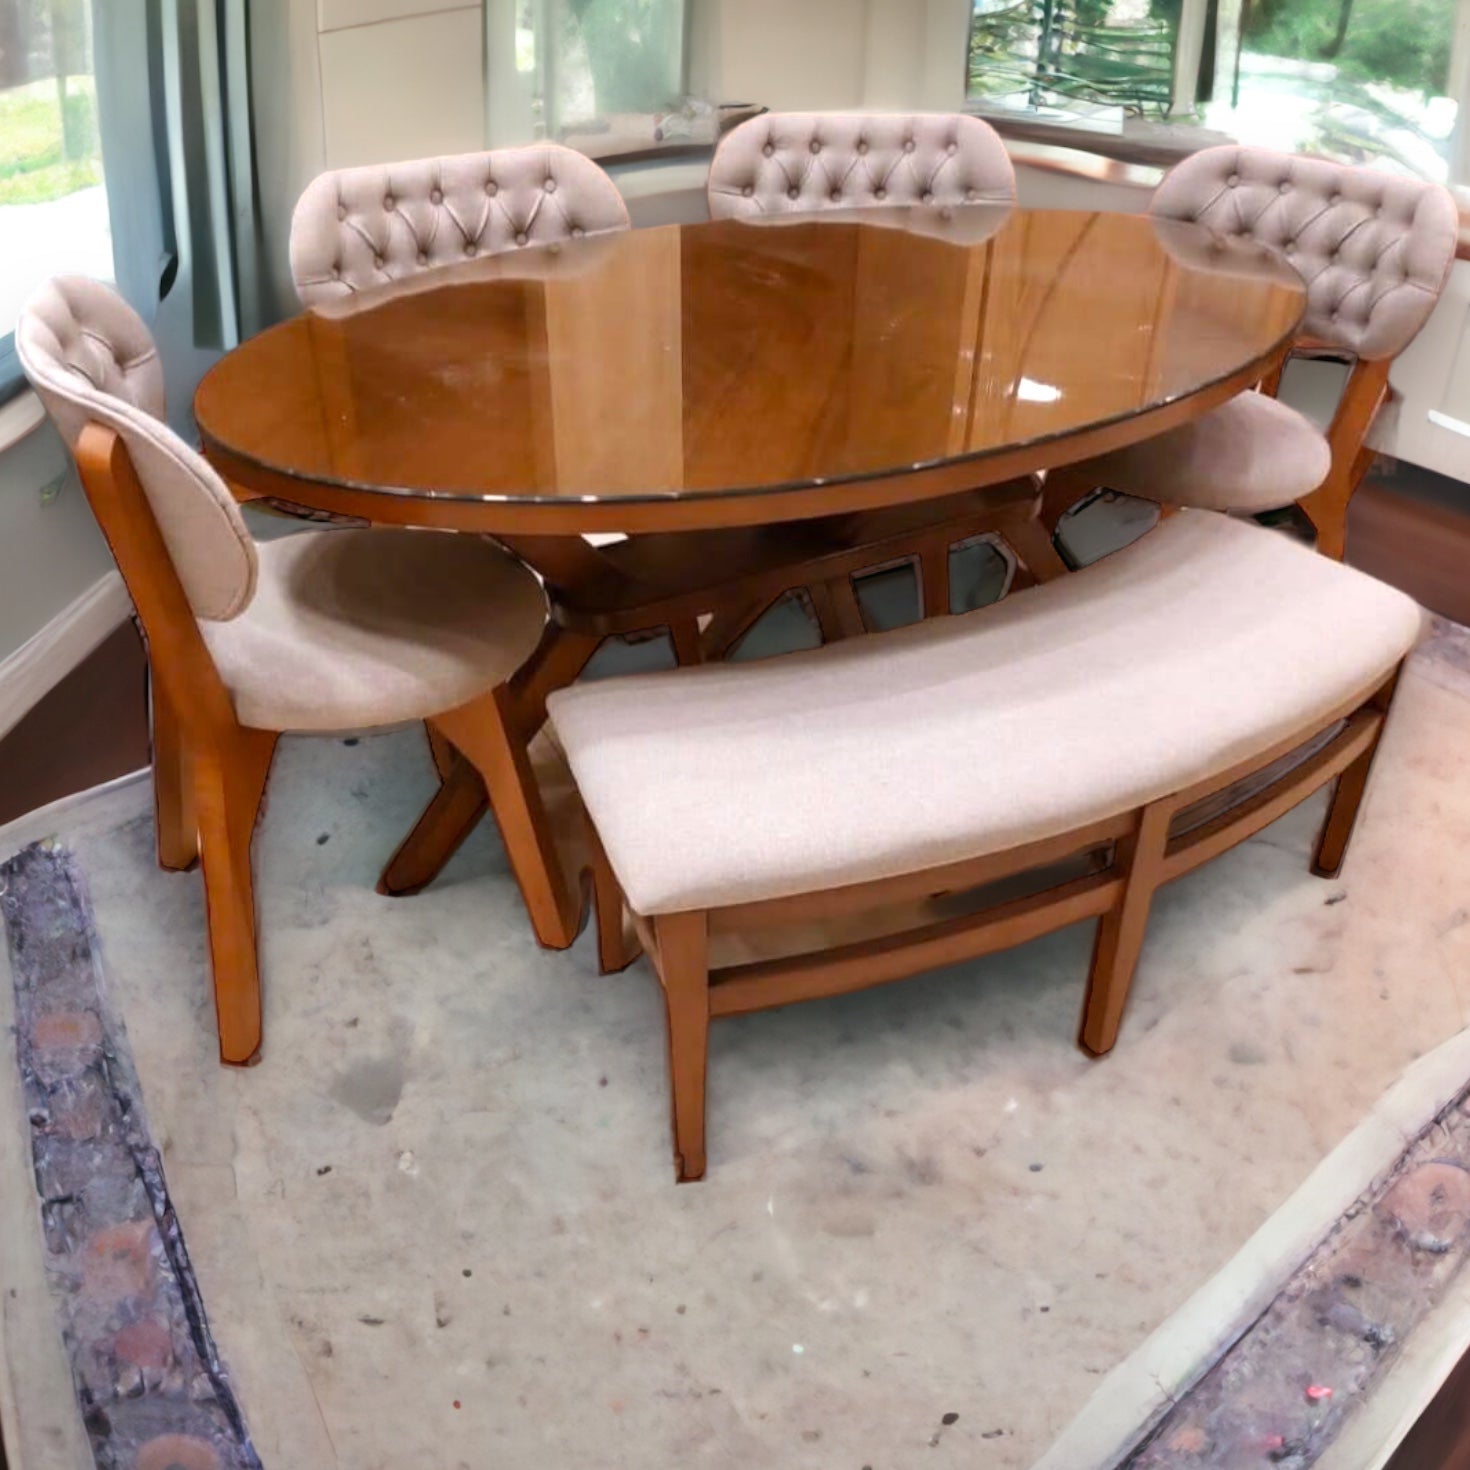 Banquet dining table and chairs 